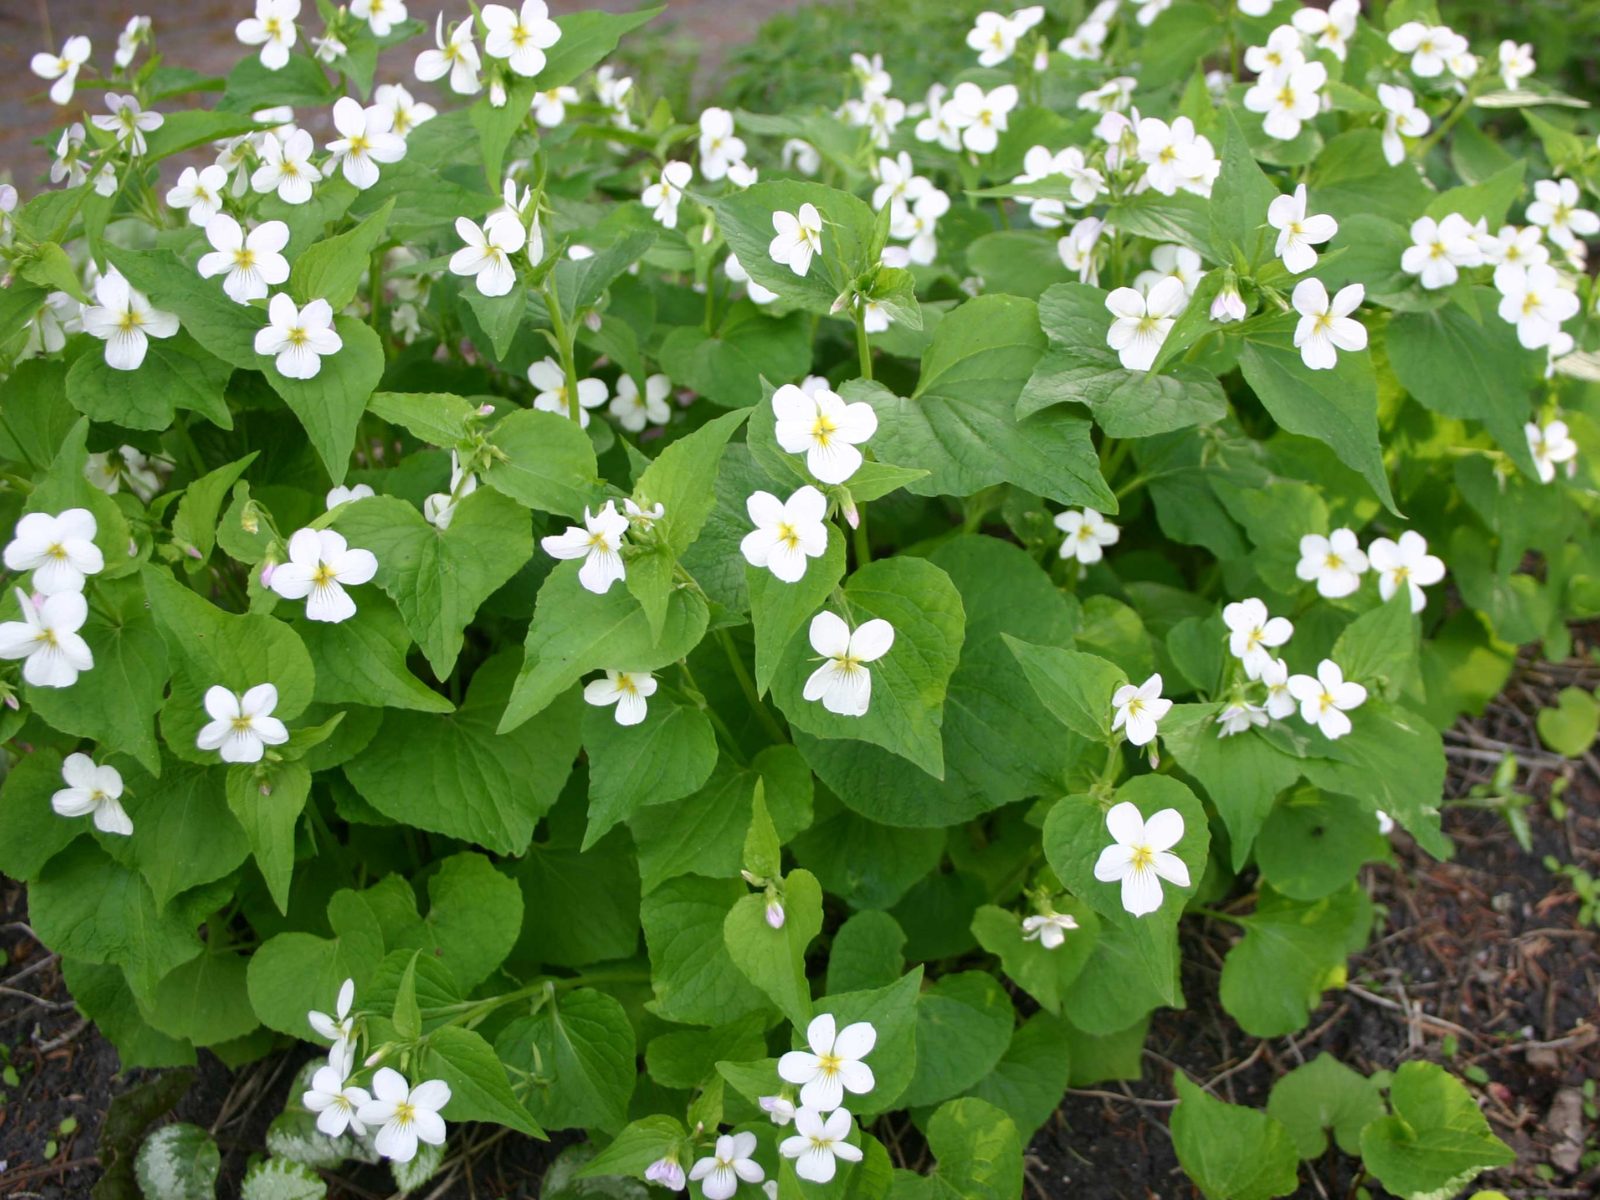 A small bush with heart-shaped green leaves and small white flowers.